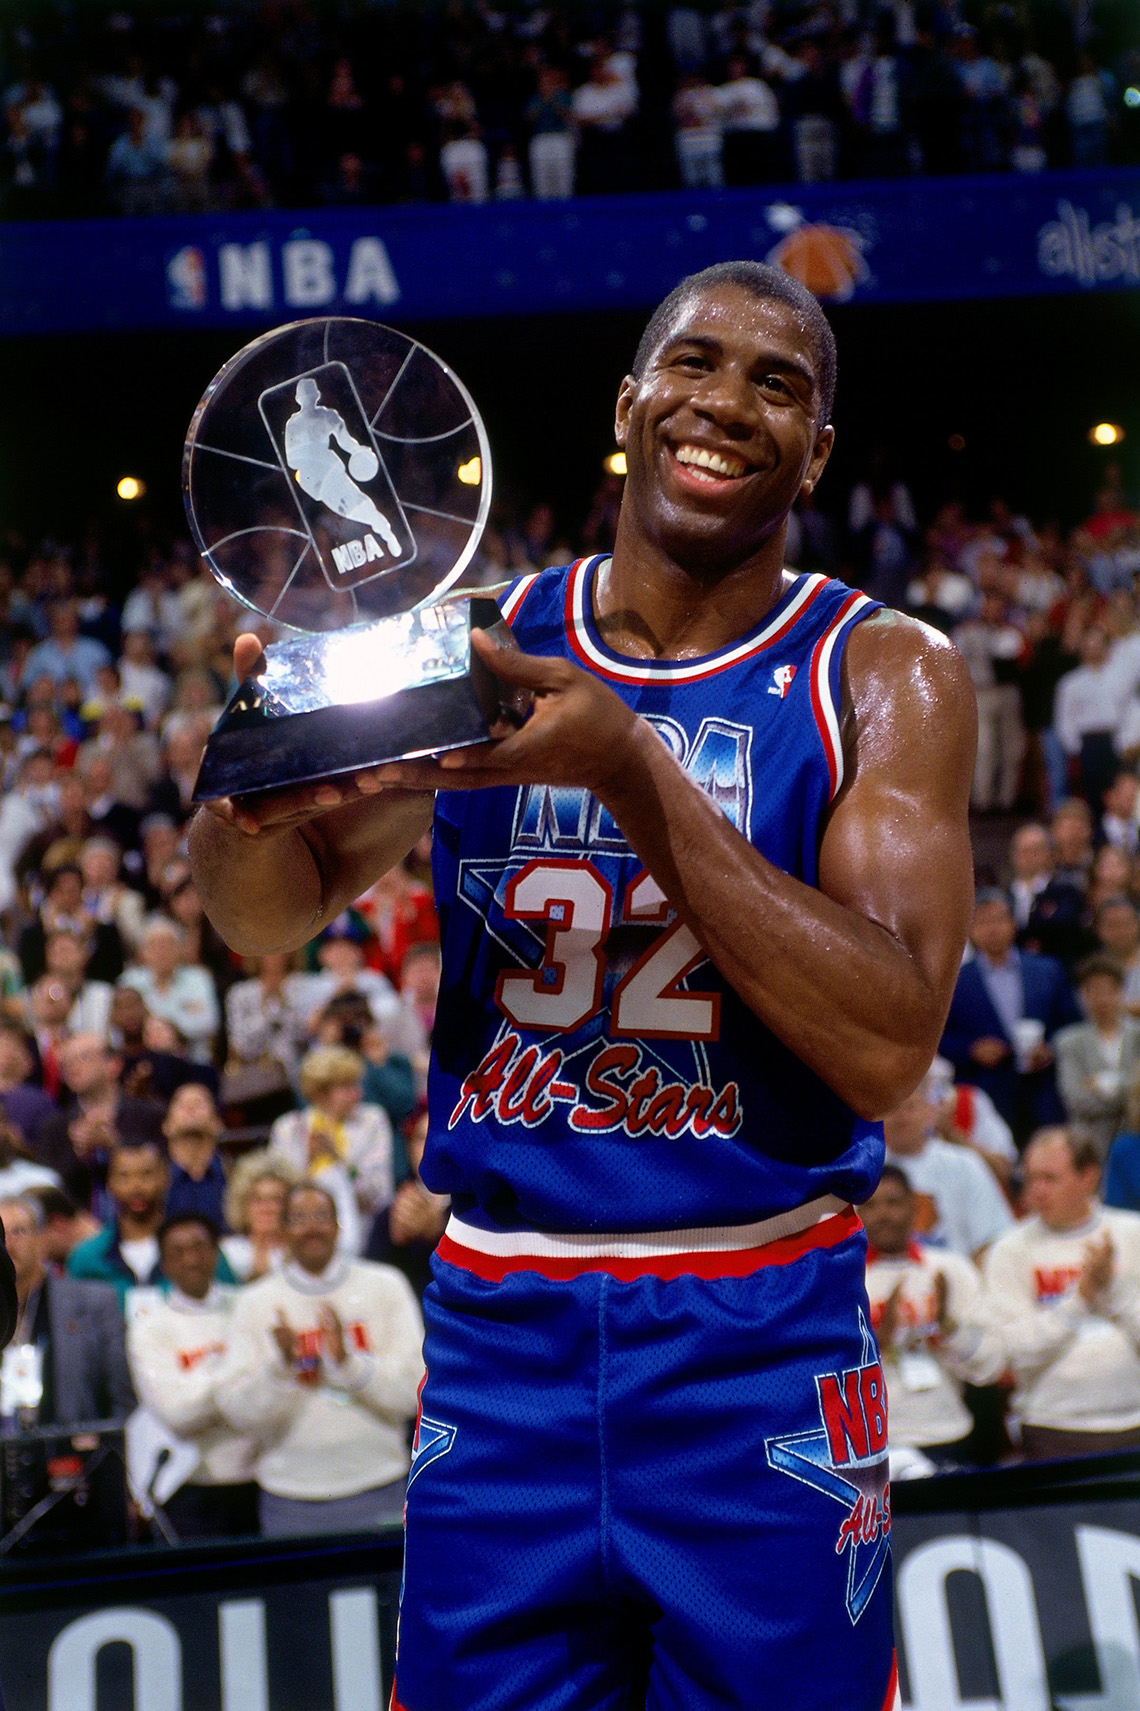 Magic Johnson holds his trophy after winning Most Valuable Player at the 1992 NBA All Star Game